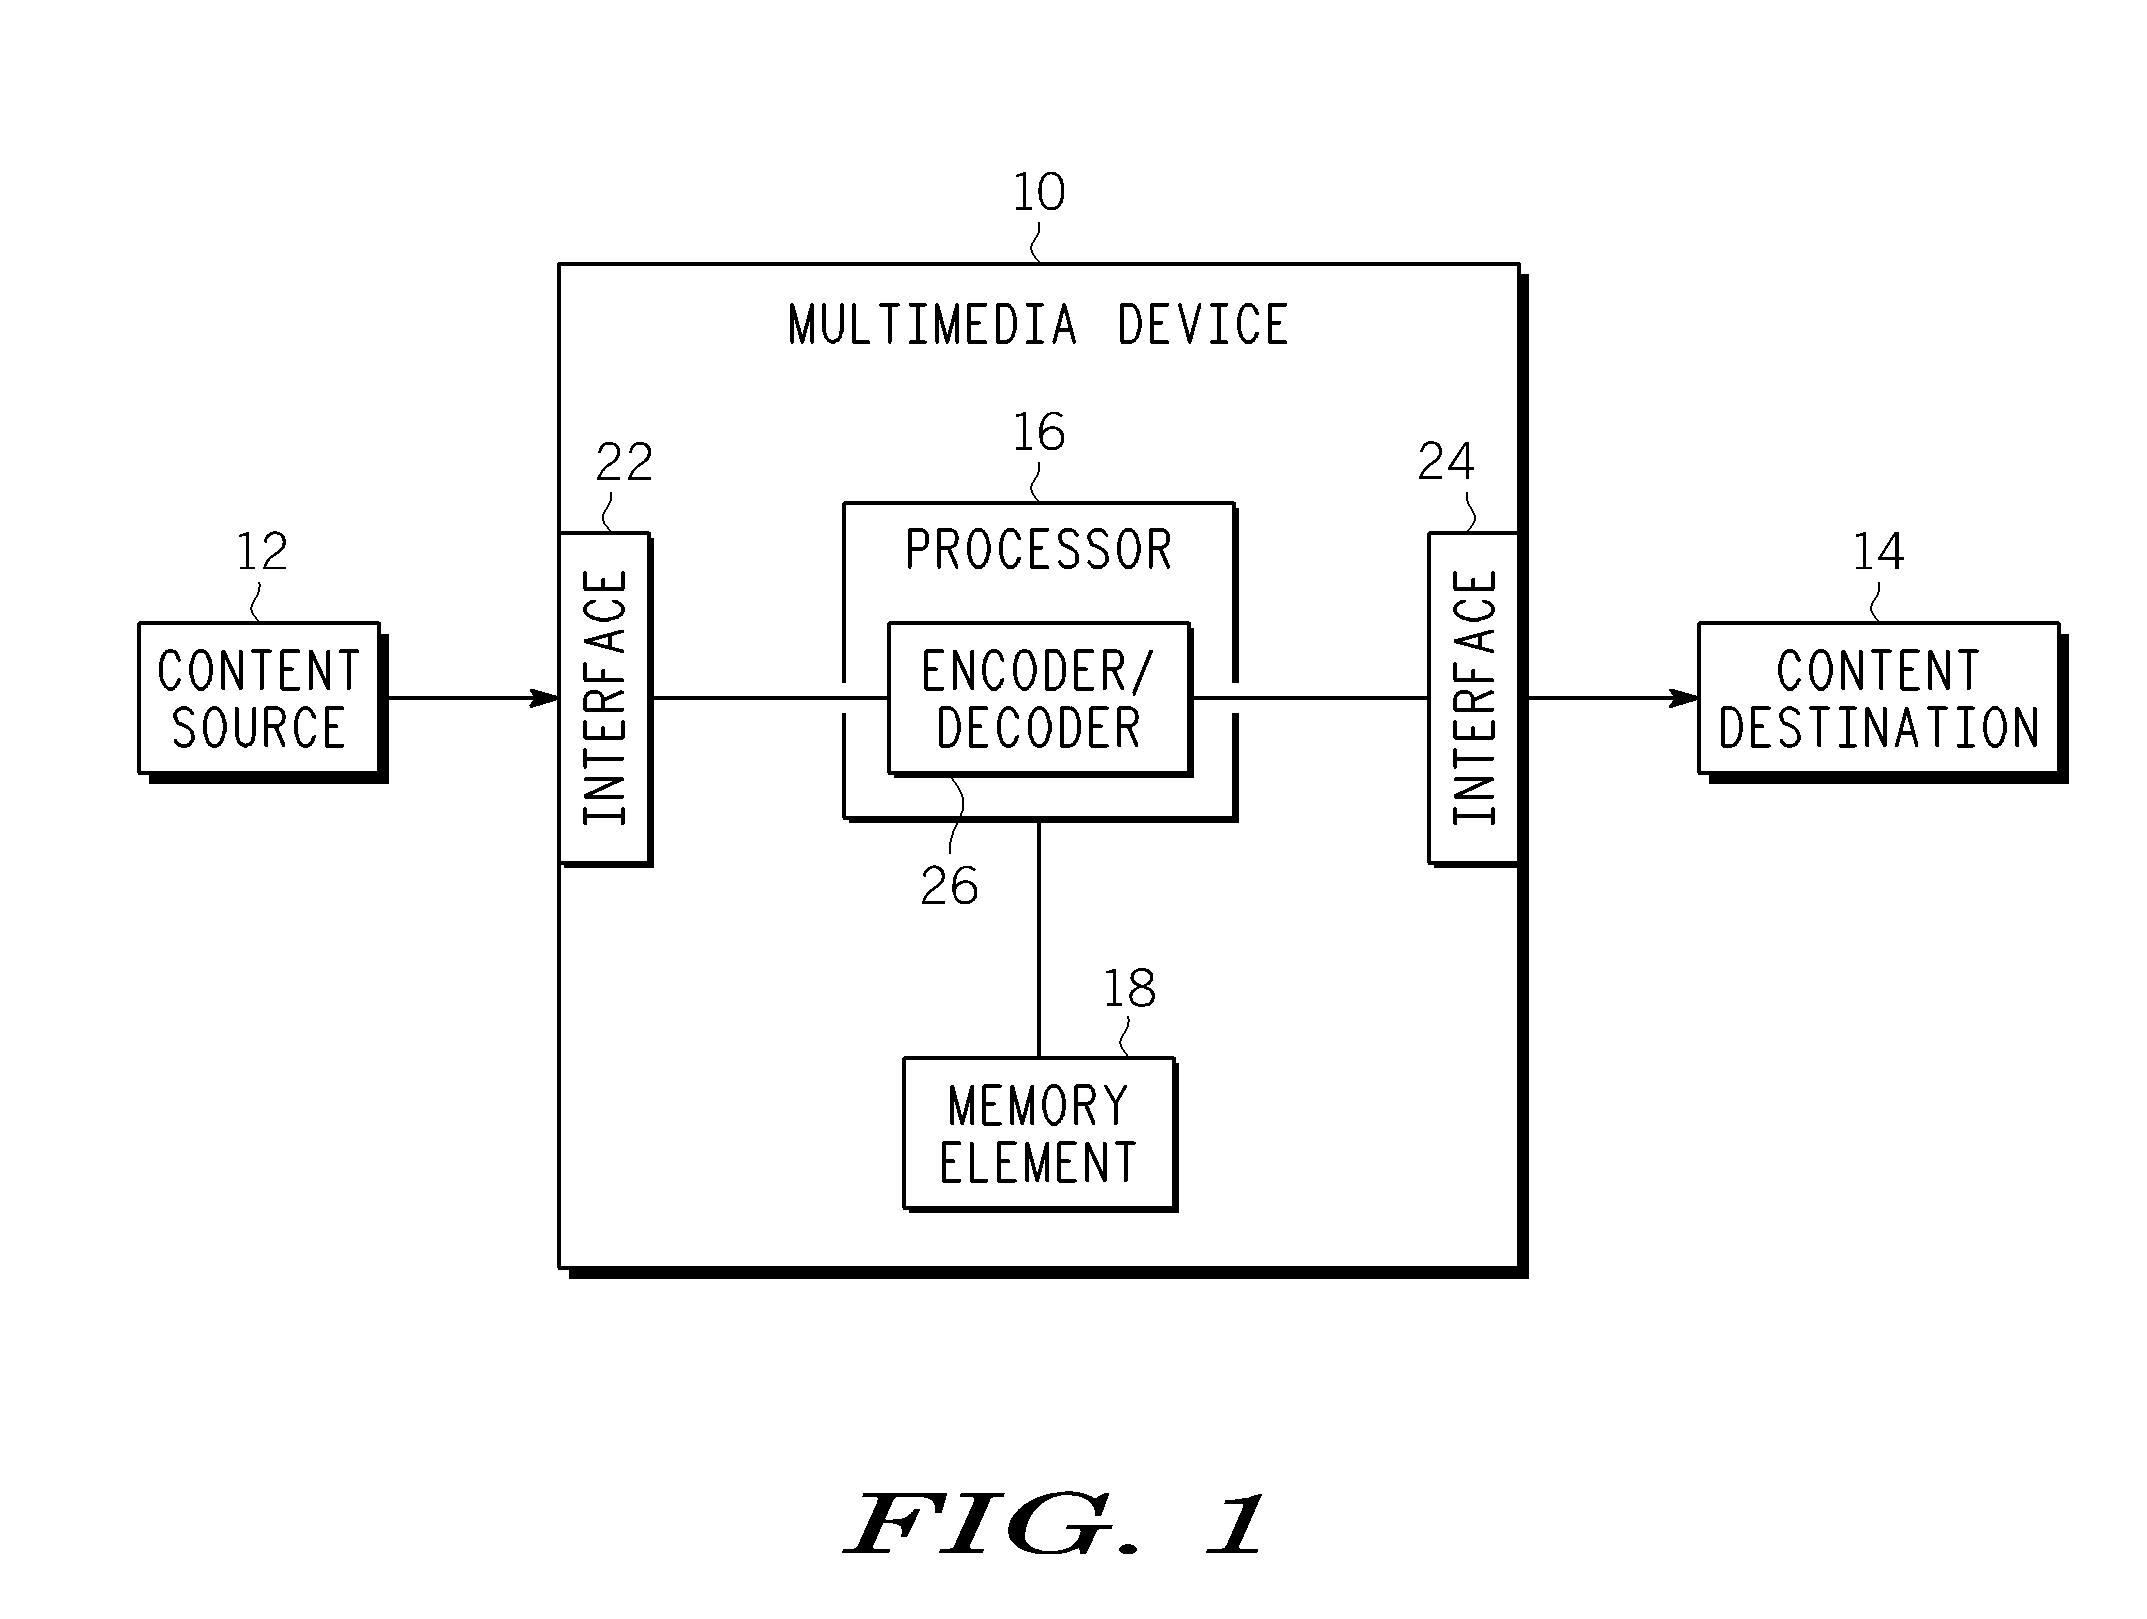 Method, Apparatus and System for Managing Access to Multimedia Content Using Dynamic Media Bookmarks